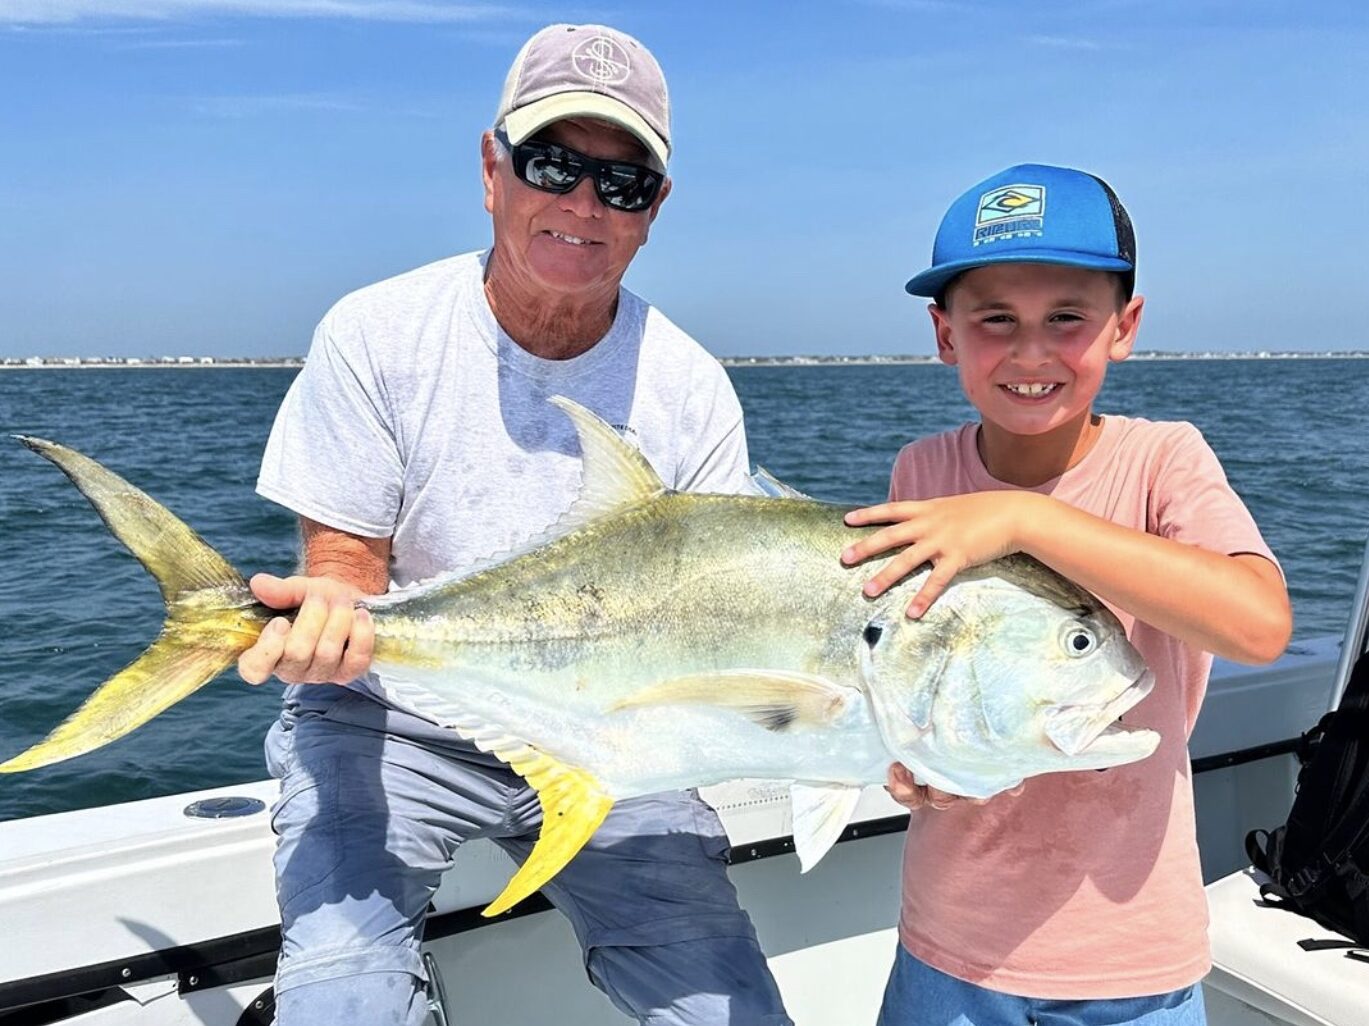 A father and son enjoying a family-friendly fishing trip in Florida. They are smiling while holding their catch, showcasing the bonding and excitement of fishing together on a memorable vacation.